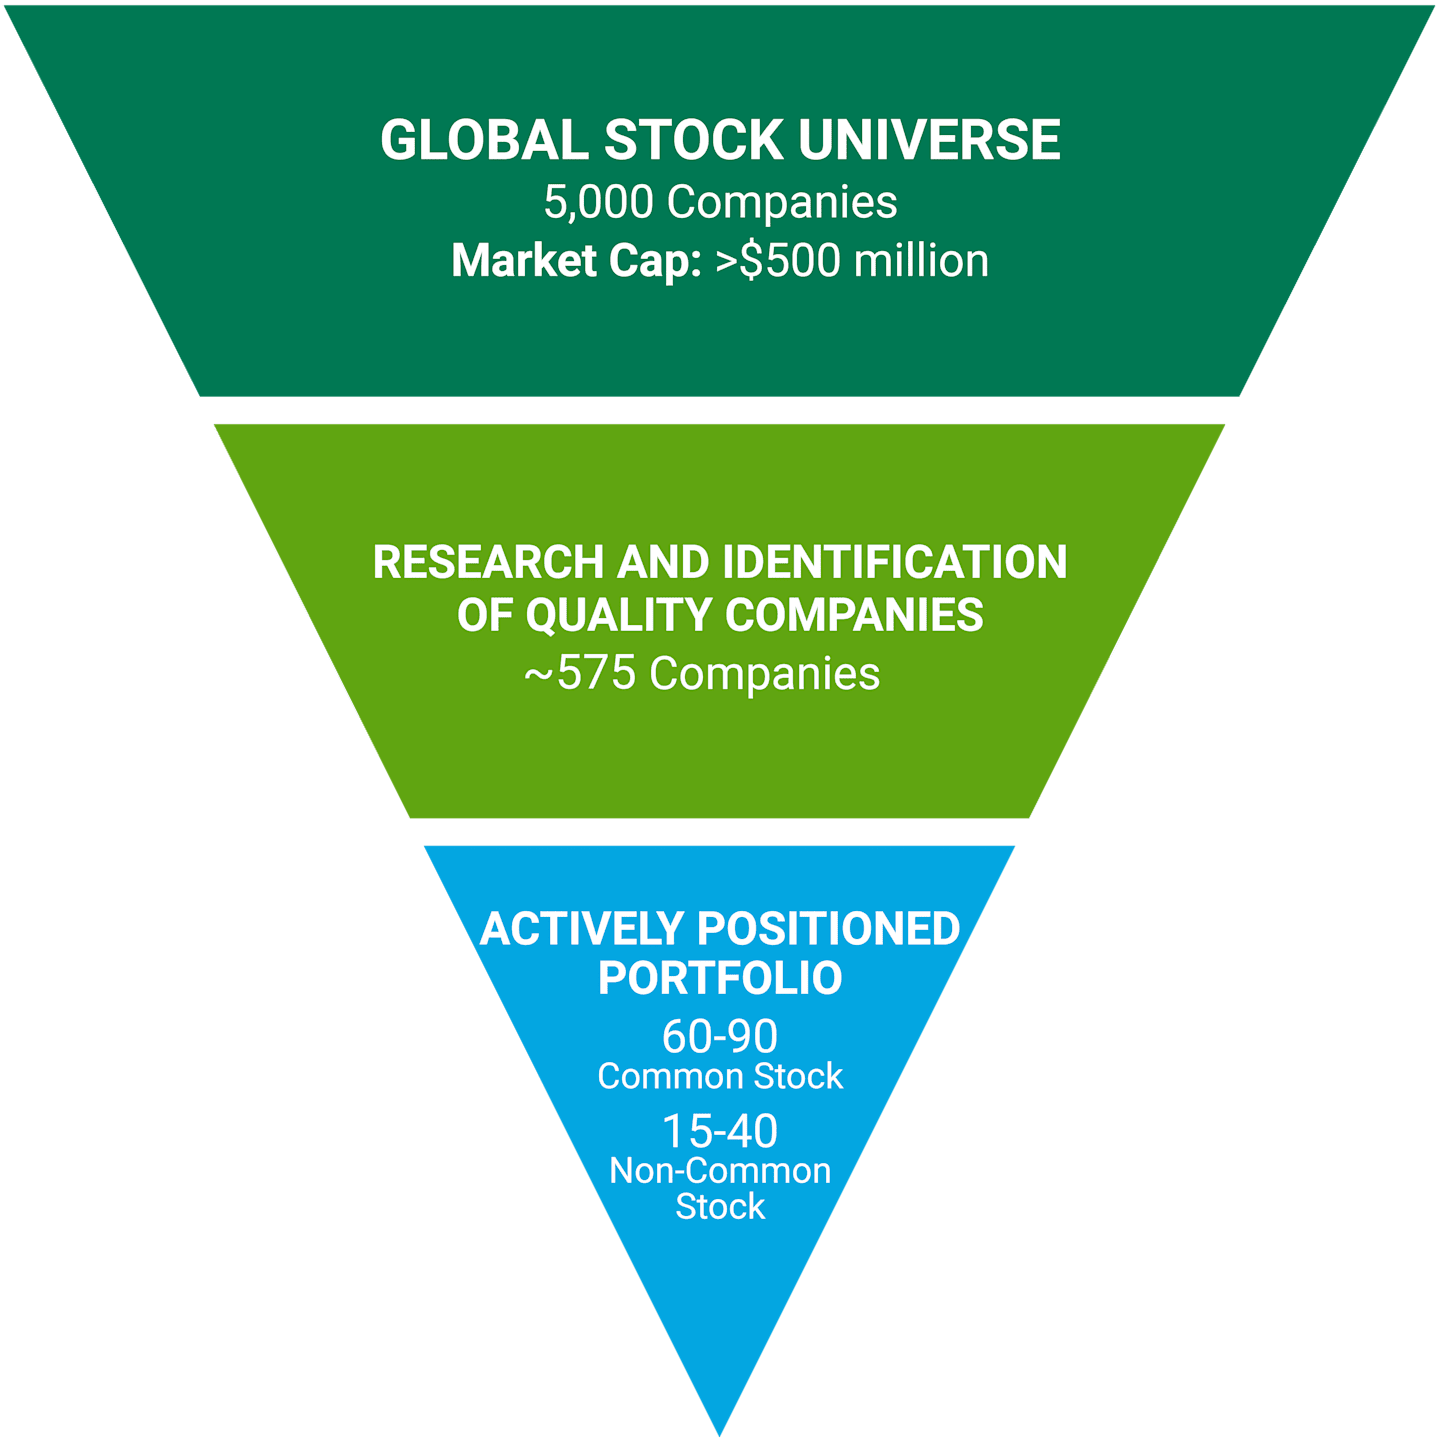 Global Stock Universe: 5,000 companies, market cap >$500M. Research and Identification of Quality Companies: 550 companies. Actively Positioned Portfolio: 60-90 common stock, 15-40 non-common stock.